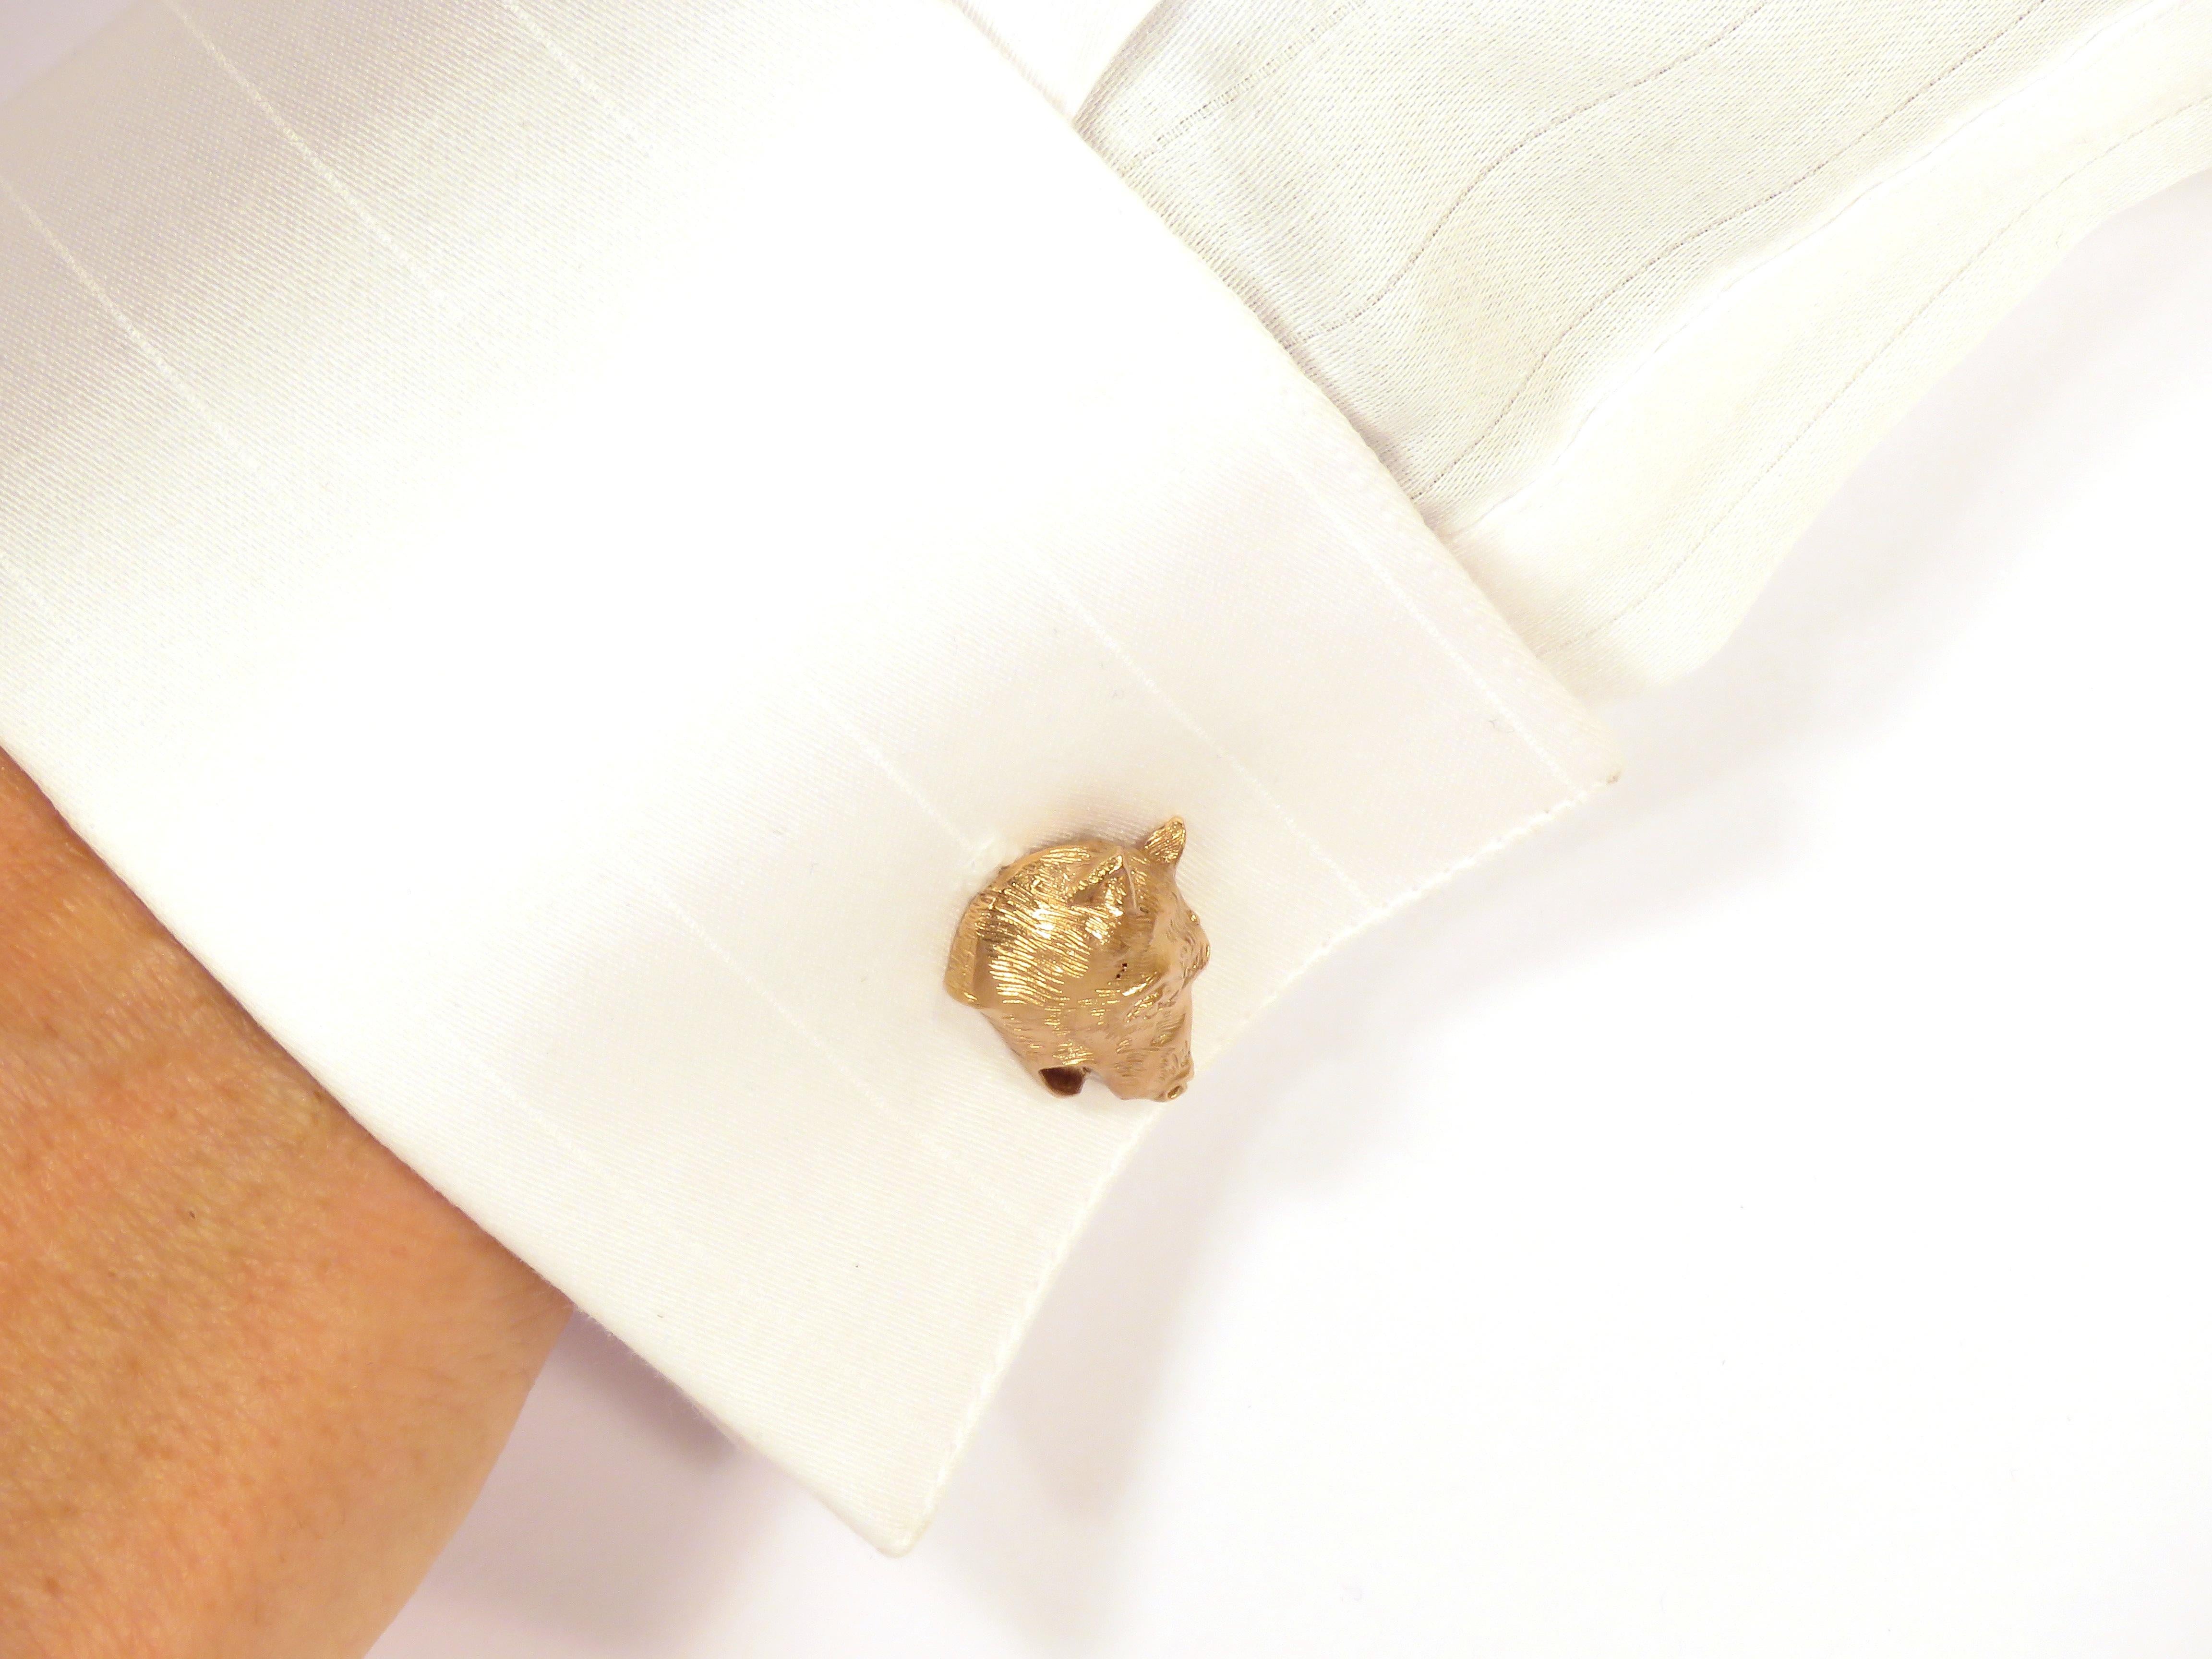 Contemporary Rose Gold Bear Cufflinks Handcrafted in Italy by Botta Gioielli For Sale